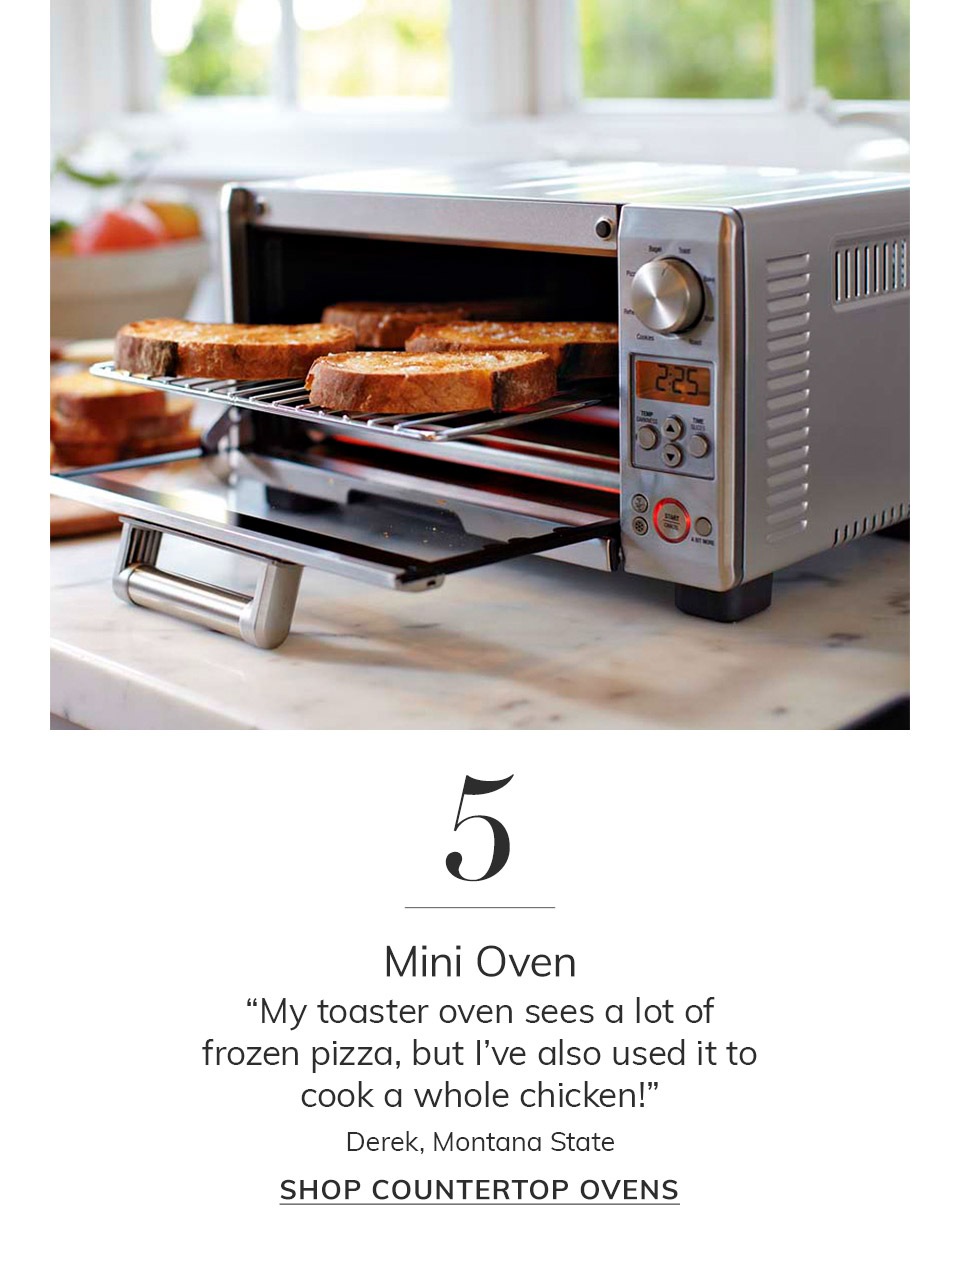 Williams Sonoma - Outfit your kitchen for $300. Our Open Kitchen Starter Set  has all the essentials for prepping, cooking and serving delicious home  cooked meals. Perfect for back-to-school or a first